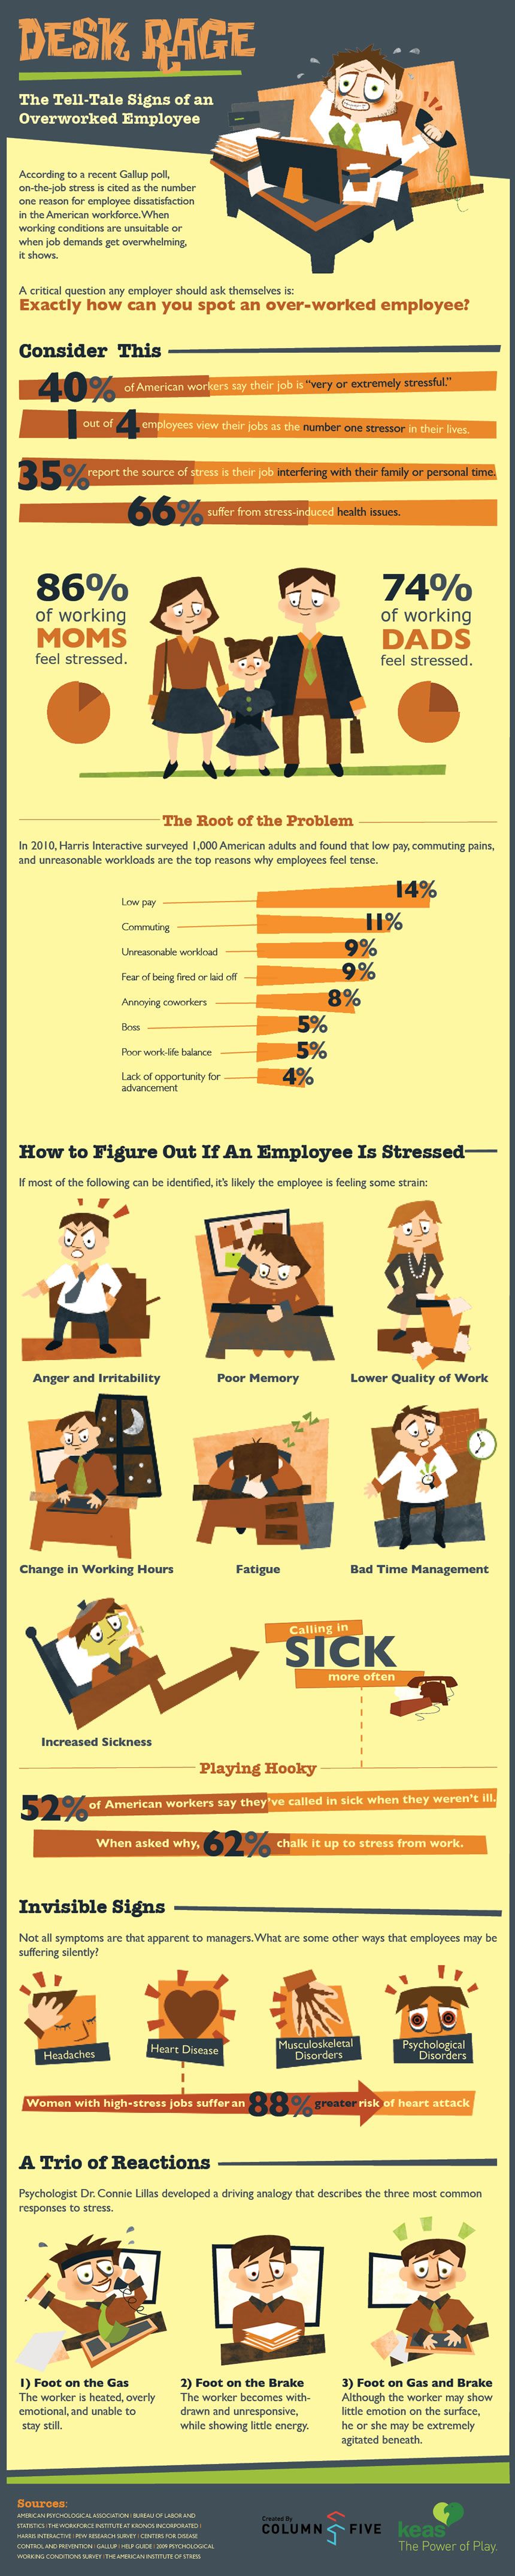 Desk Rage: The Tell Tale Signs of an Overworked Employee [Infographic]